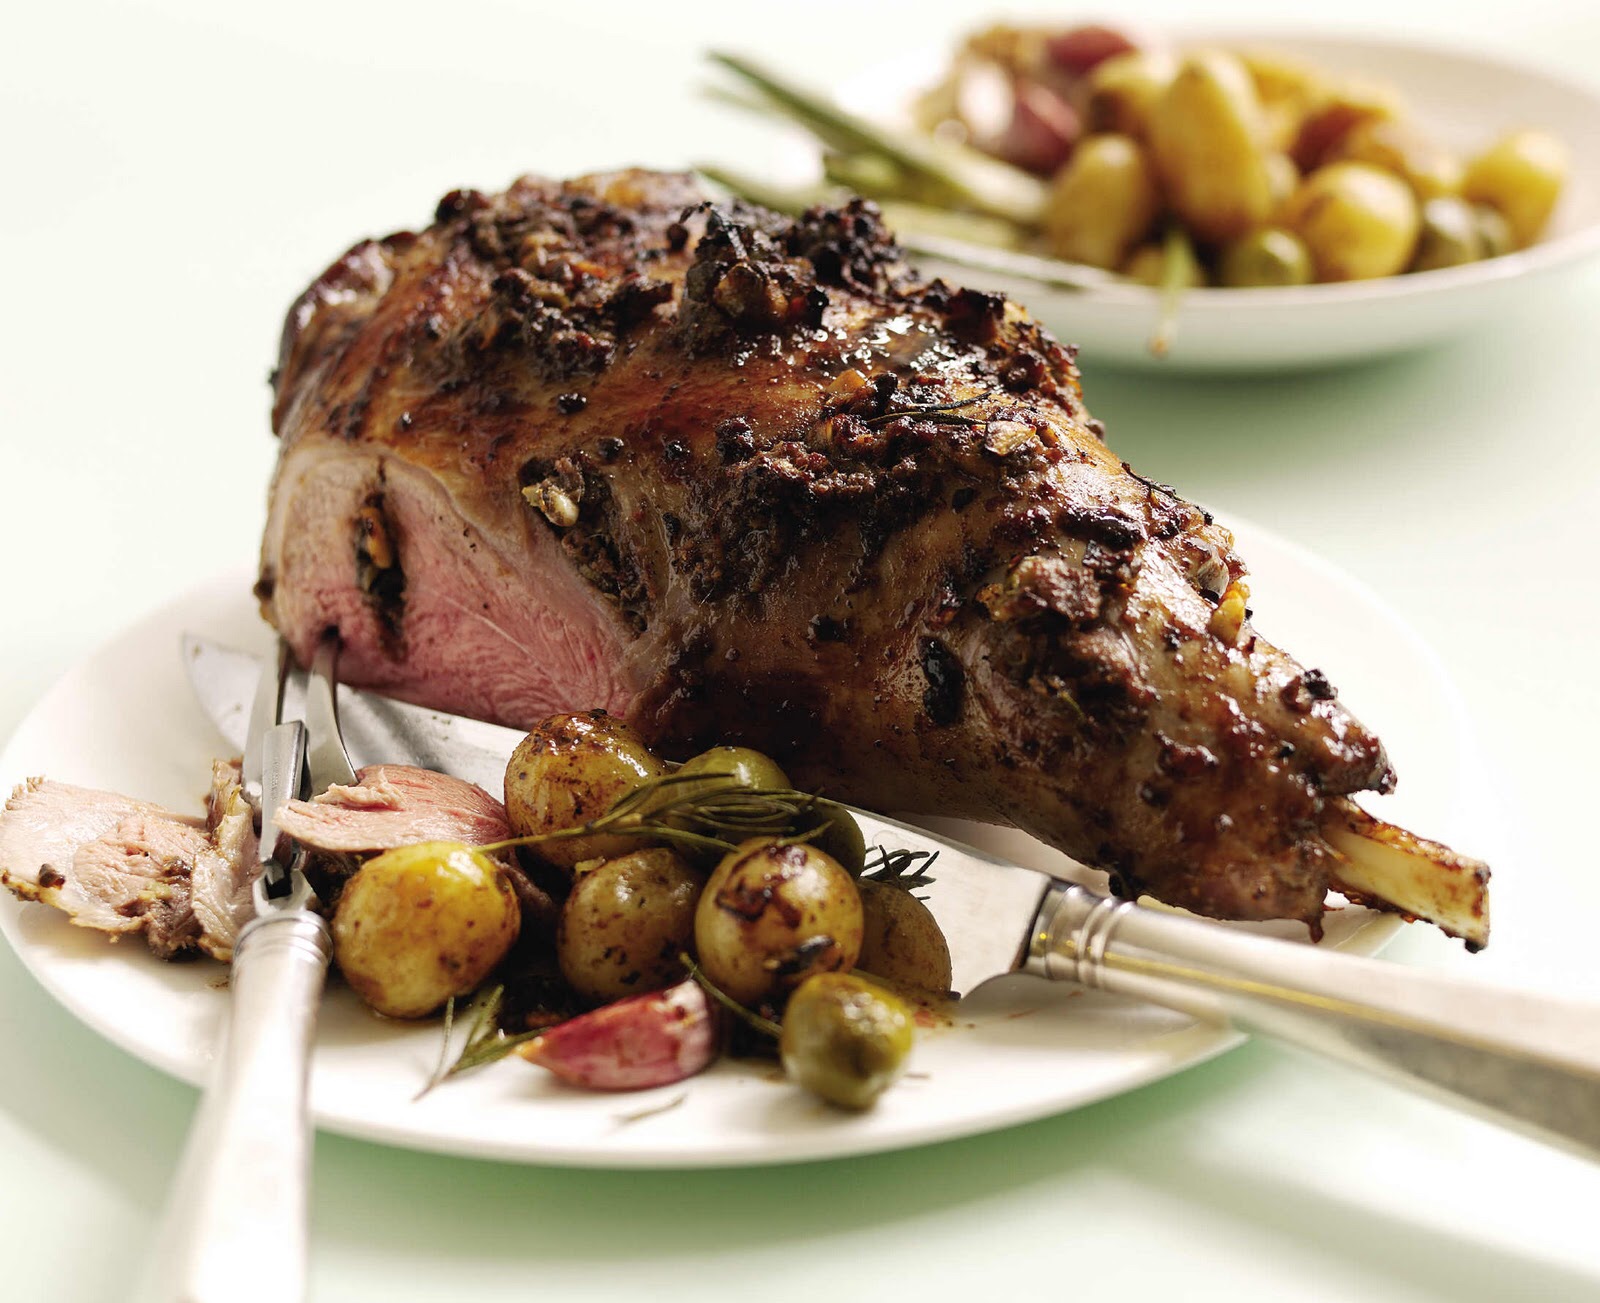 Meanwhile, British lamb meat from farms across England and Wales boasts excellent tenderness – perfect for a lamb stew with some rosemary or cooking it on the BBQ out